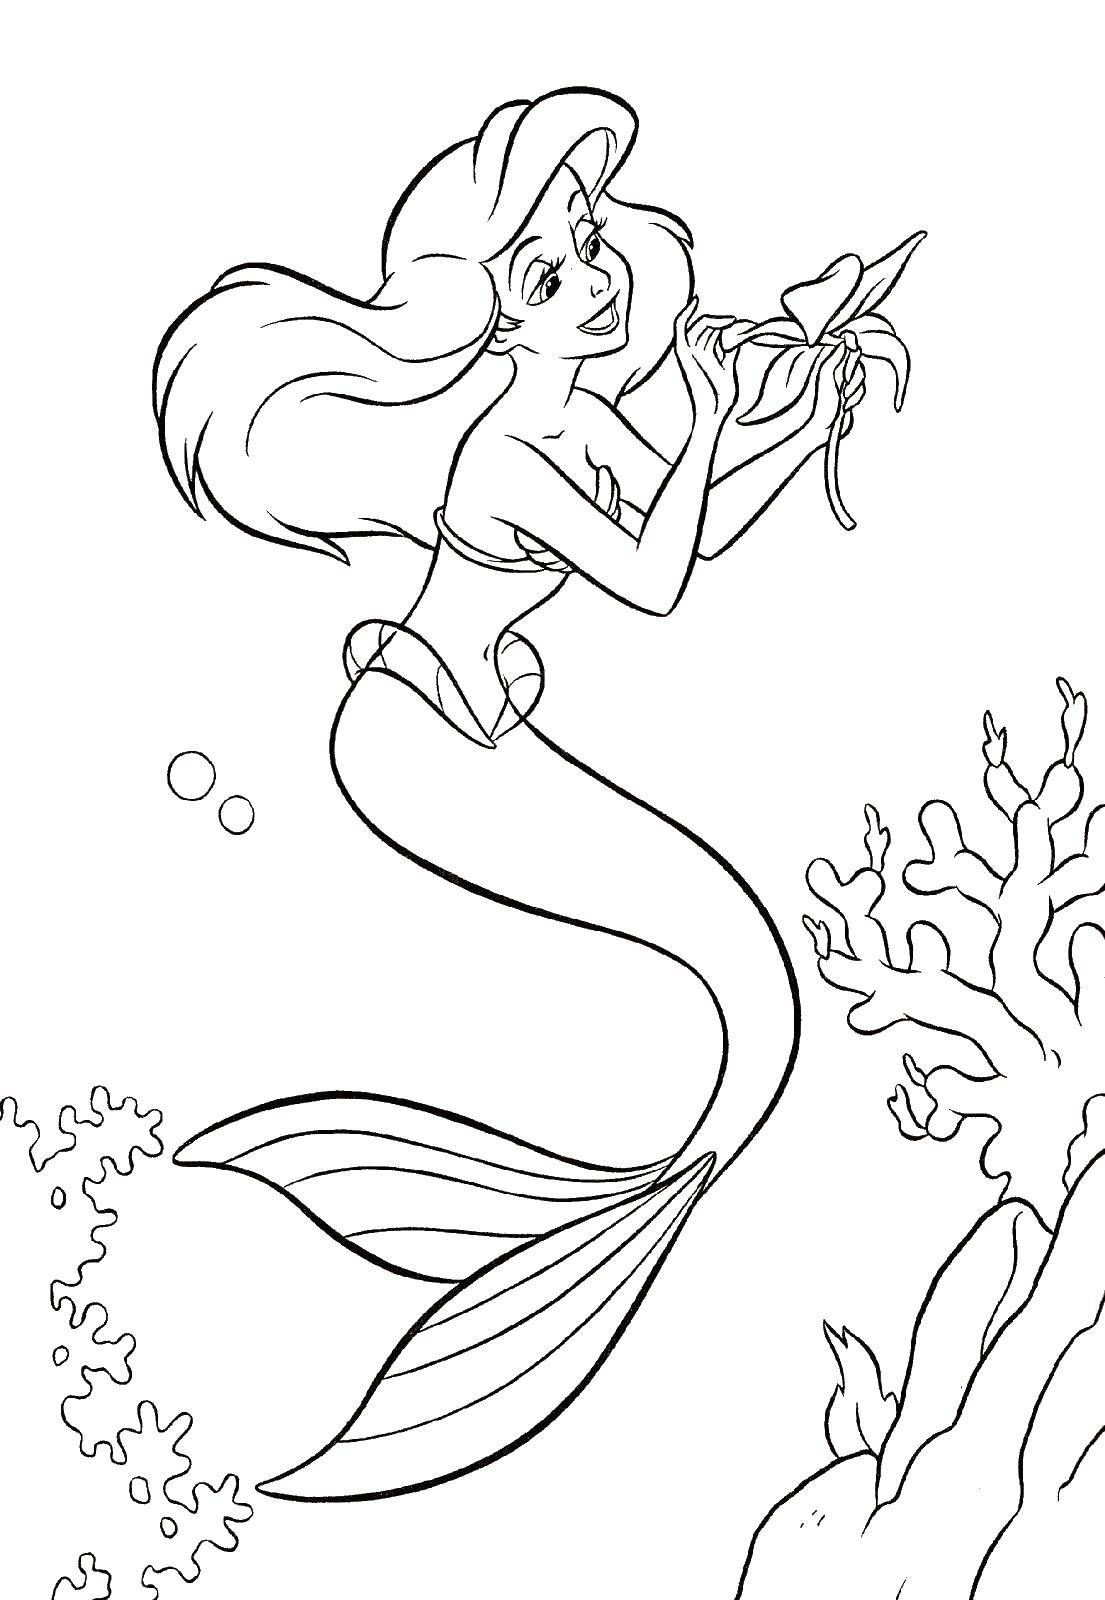 Coloring Ariel with flower. Category cartoons. Tags:  Disney, the little mermaid, Ariel.